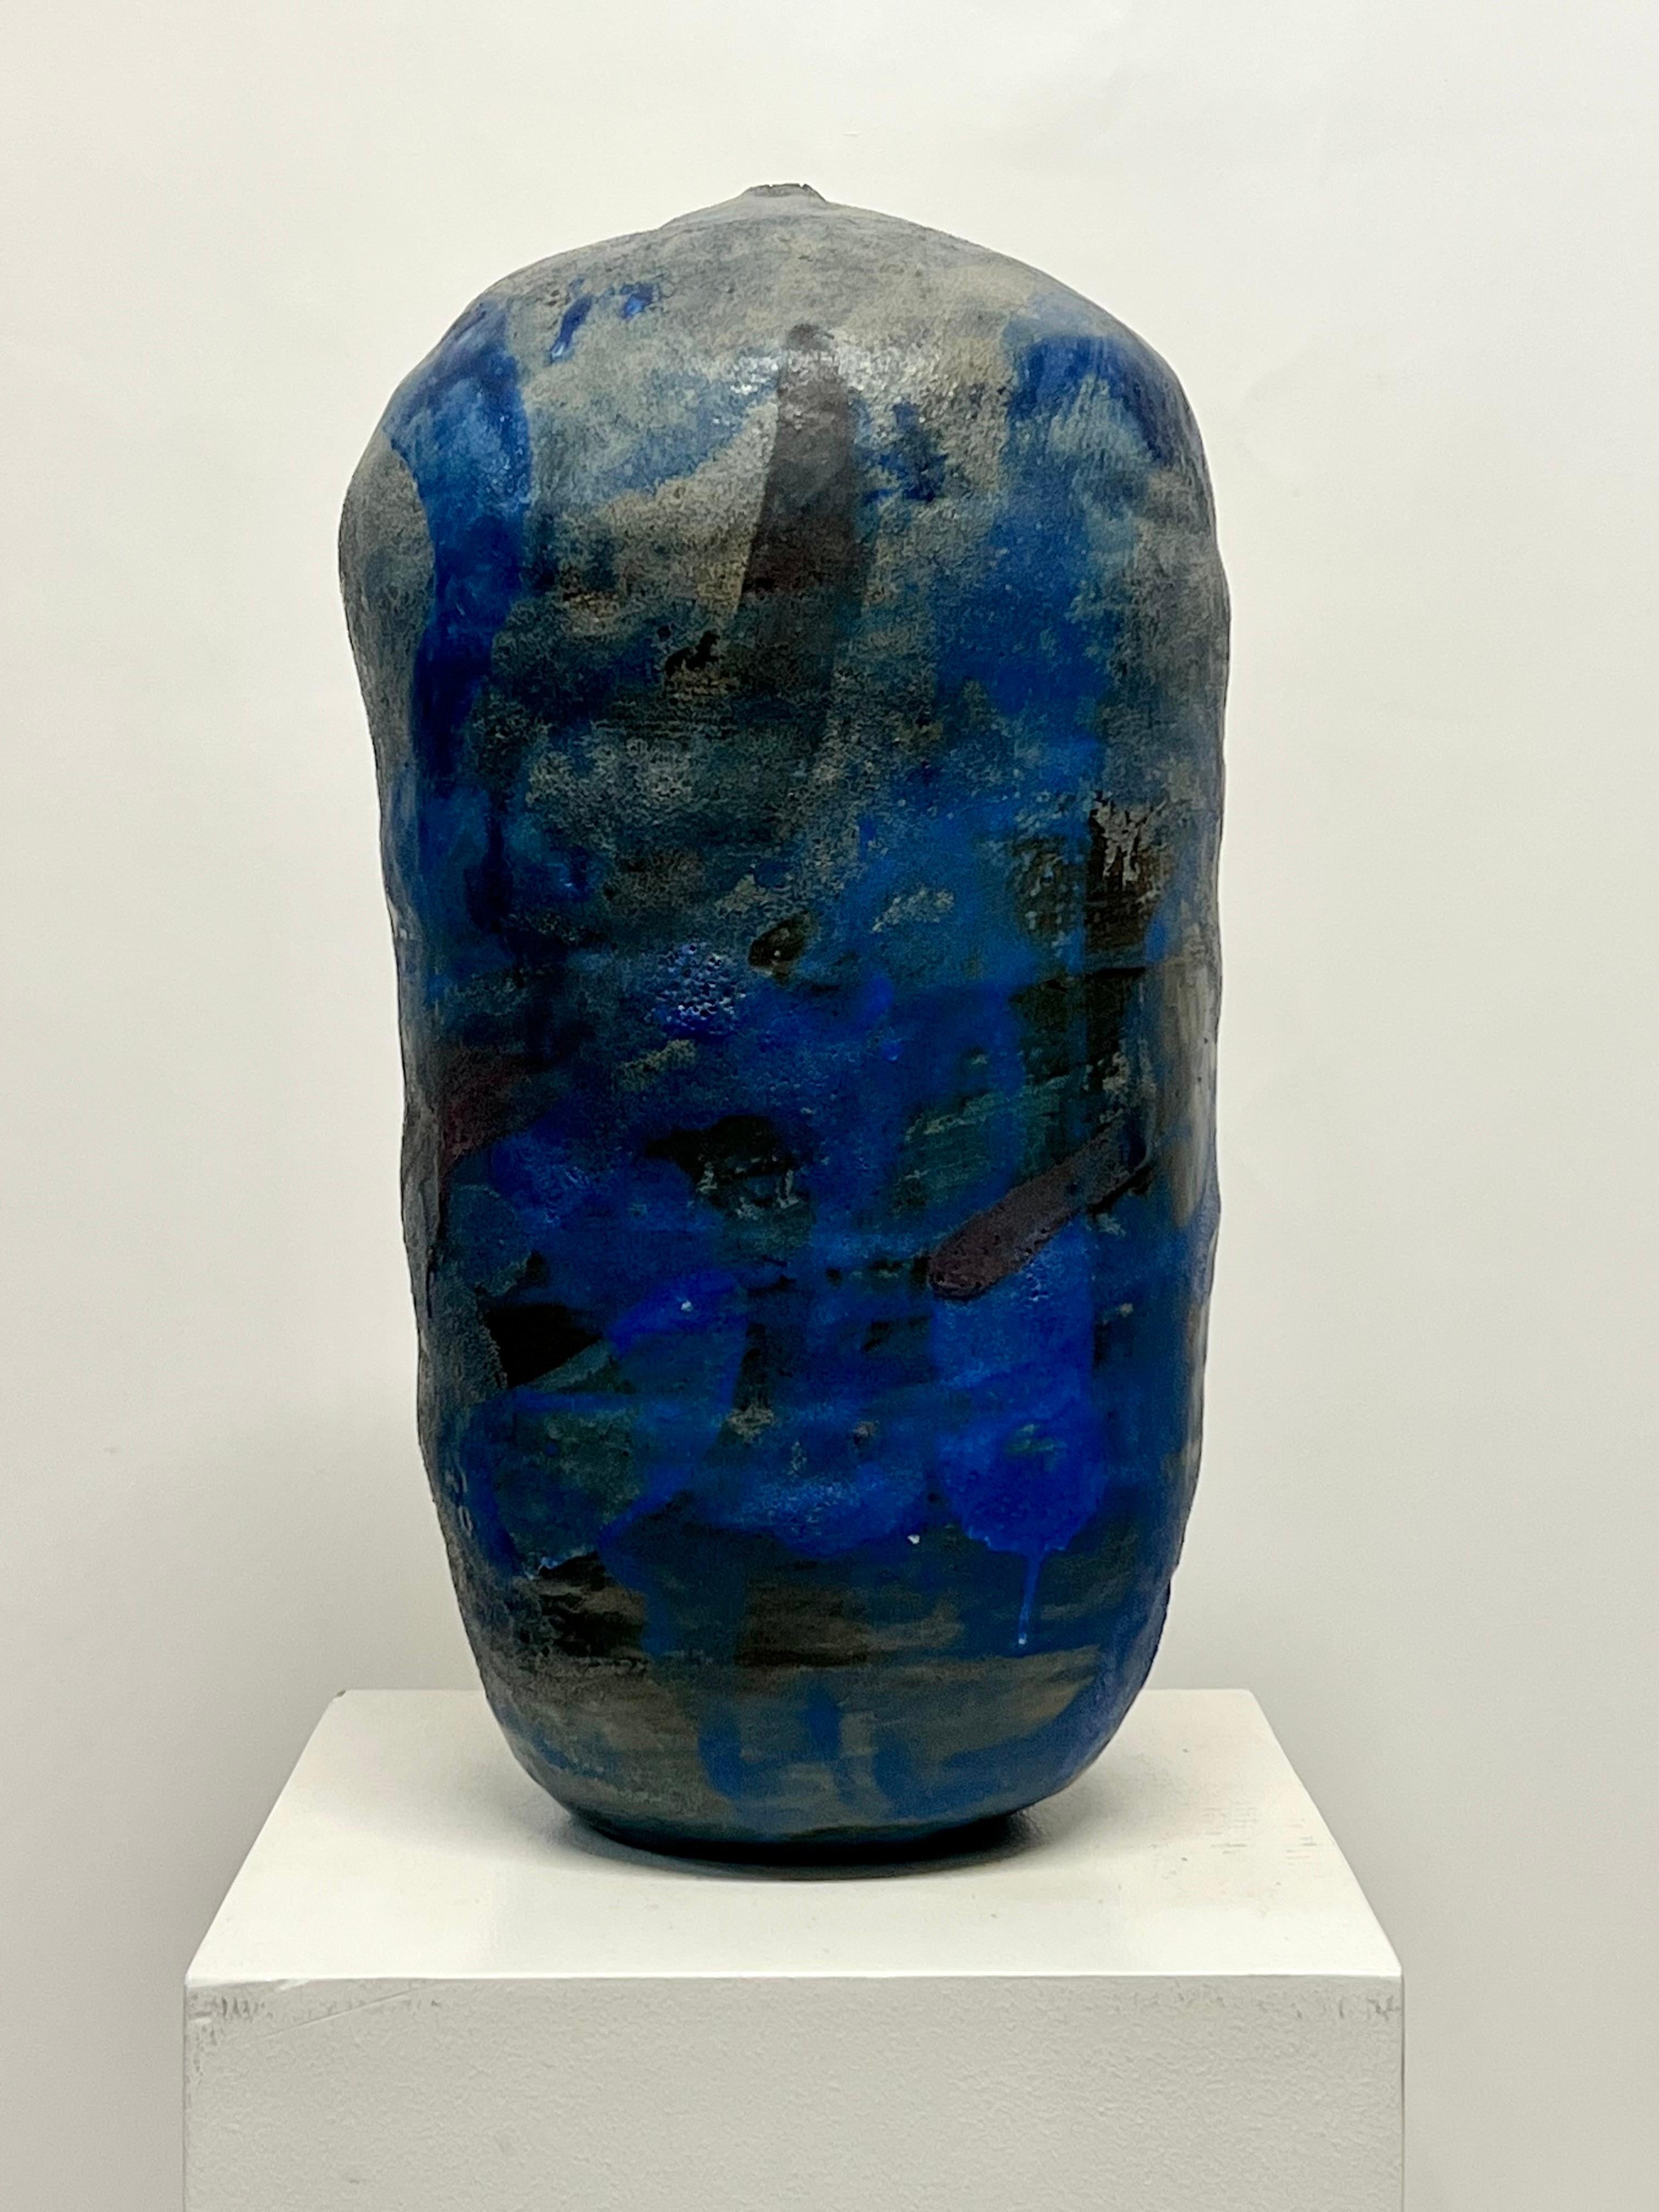 Large abstract ceramic vessel with various shades of blue by Bay Area artist, Justin Hoffman circa 2021. Hoffman (b.1974) is an American ceramic artist and painter based in the San Francisco Bay Area. His work constantly shifts between sculpture,